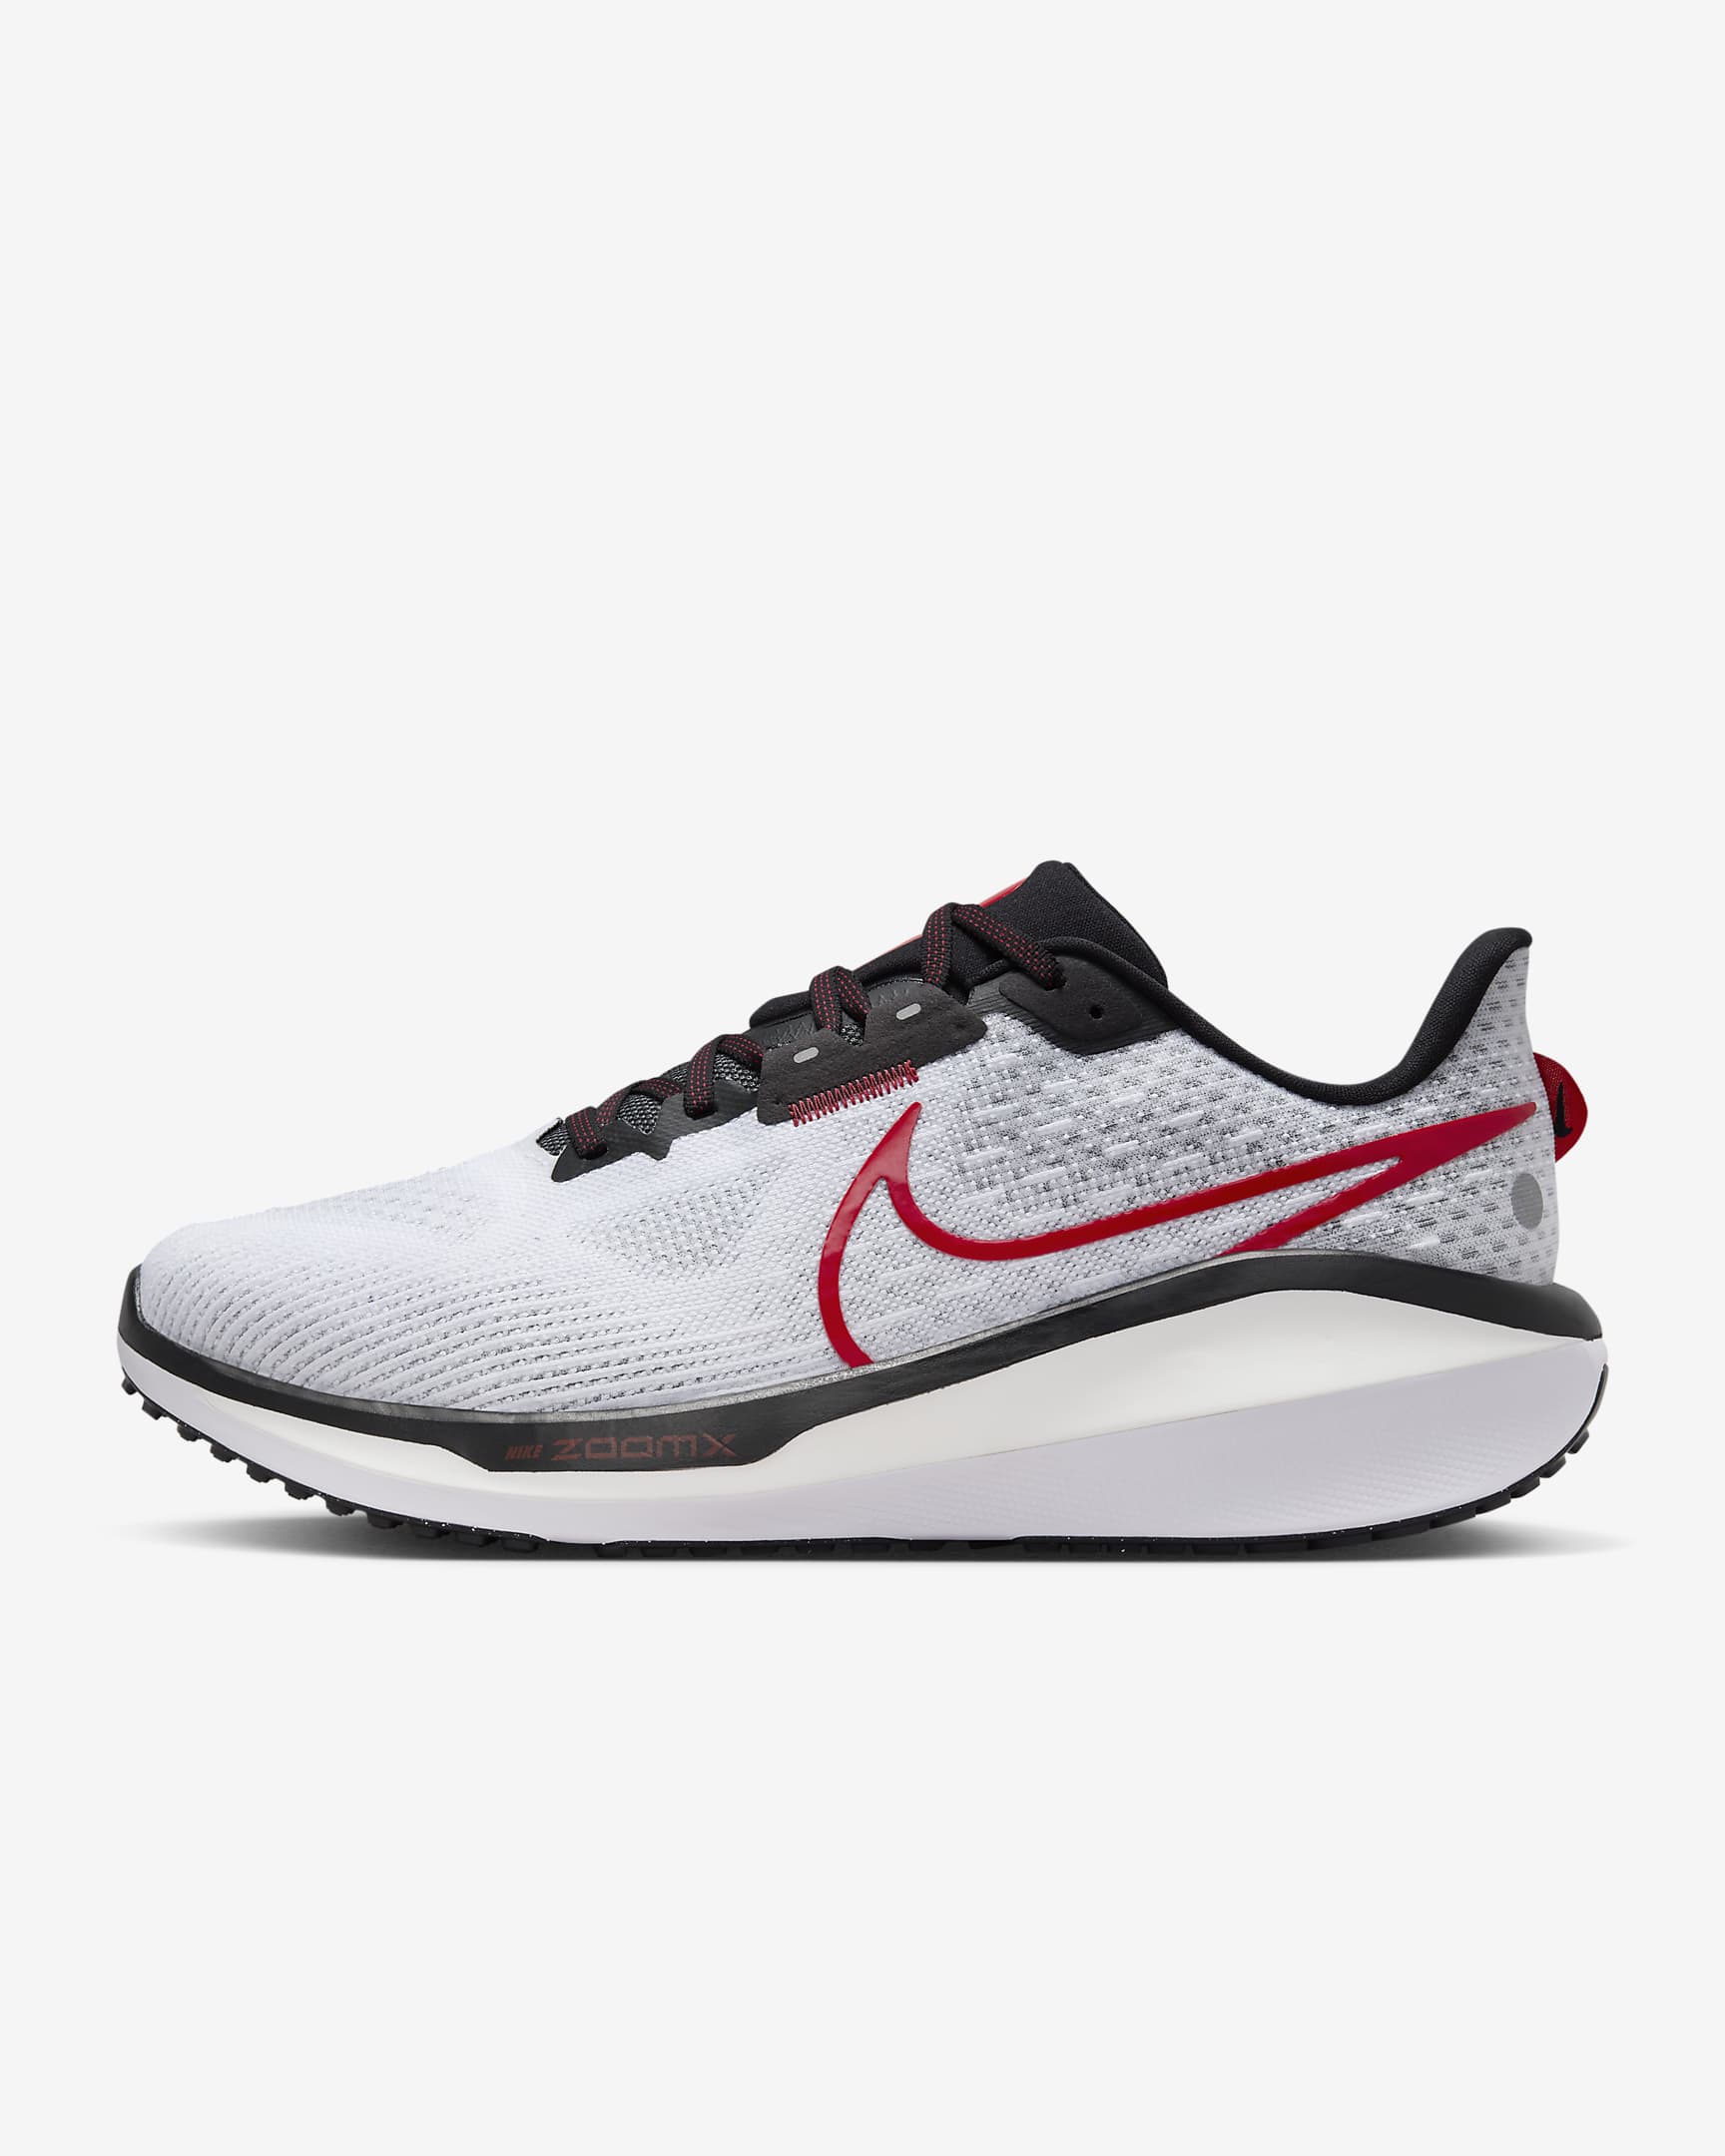 Nike Vomero 17 Men's Road Running Shoes - White/Fire Red/Platinum Tint/Black